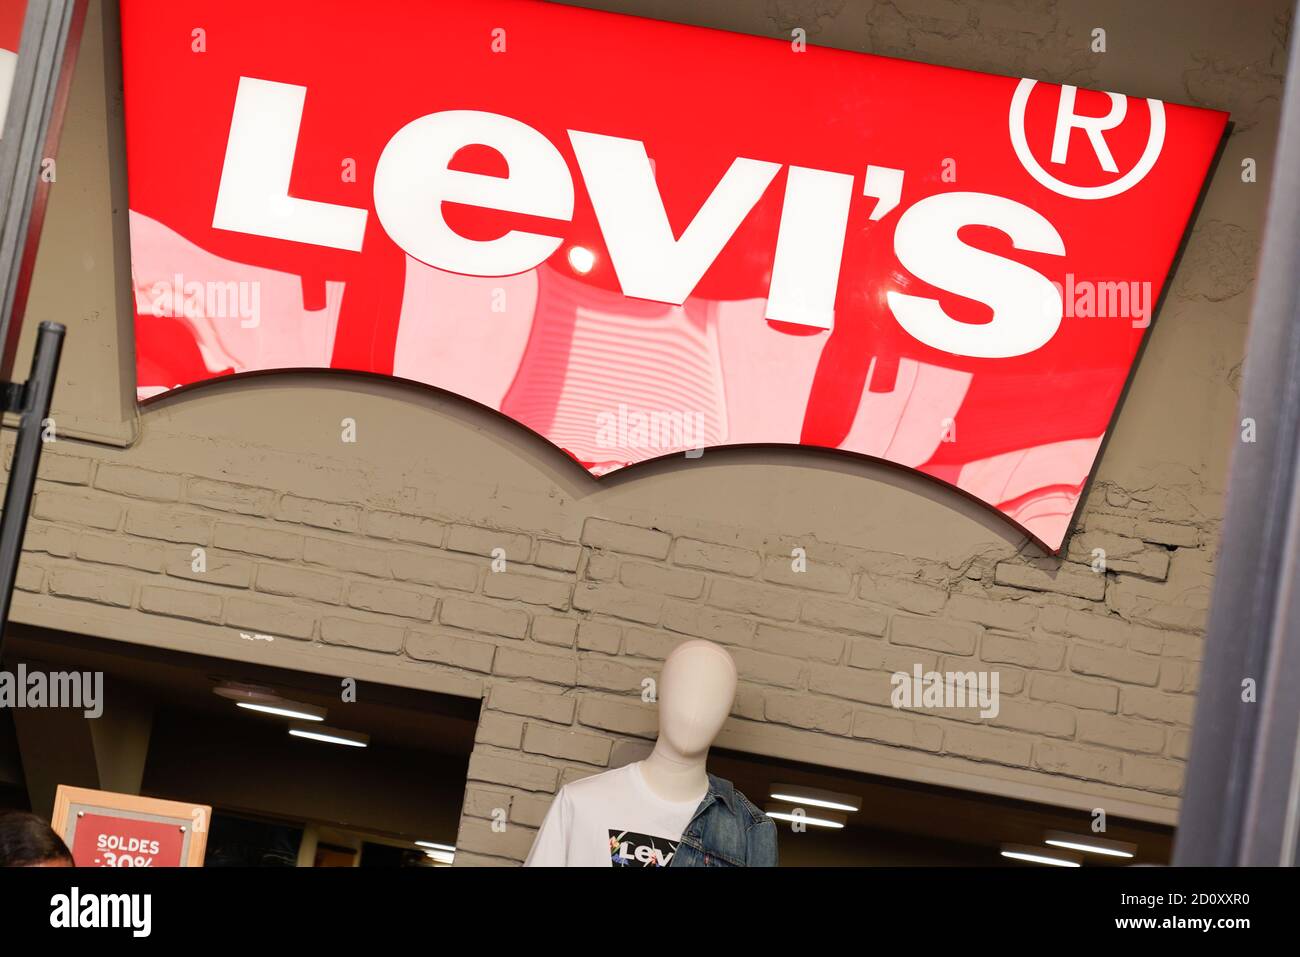 Bordeaux , Aquitaine / France - 10 01 2020 : levis red sign and logo front  of shop Levi's Jeans Stock Photo - Alamy